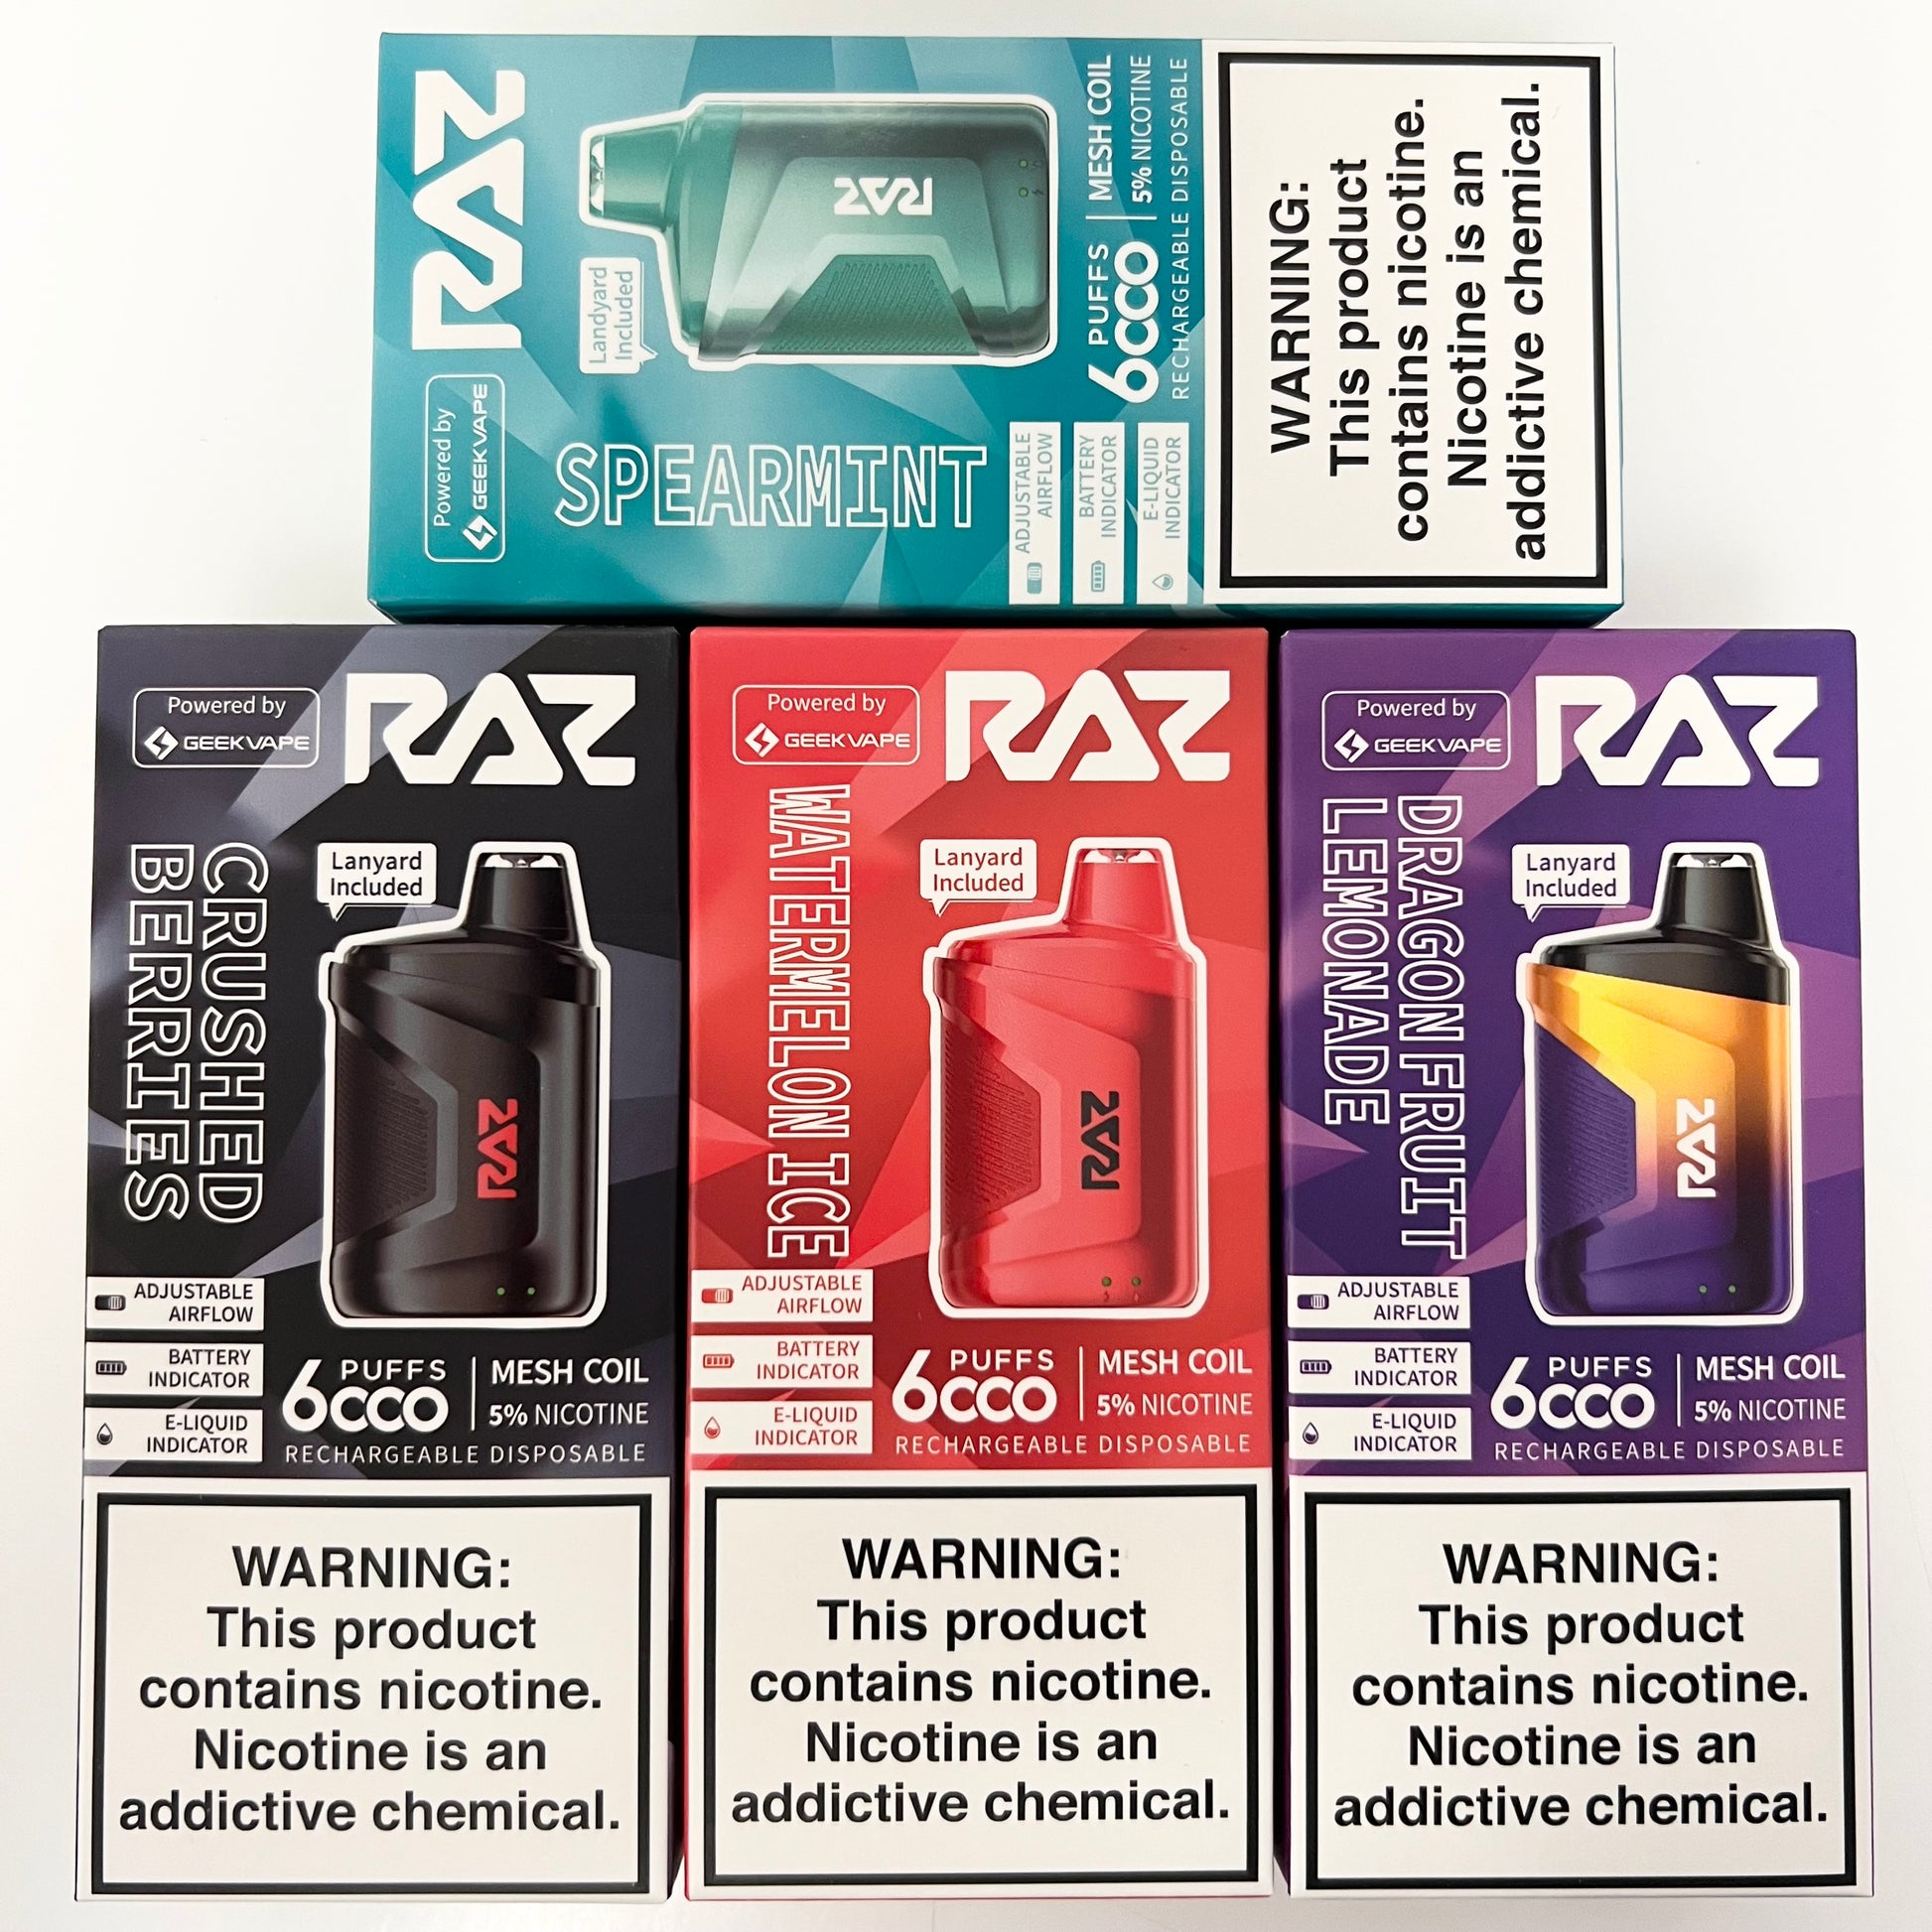 Raz 6000 Puff Rechargeable Disposable by Geekvape